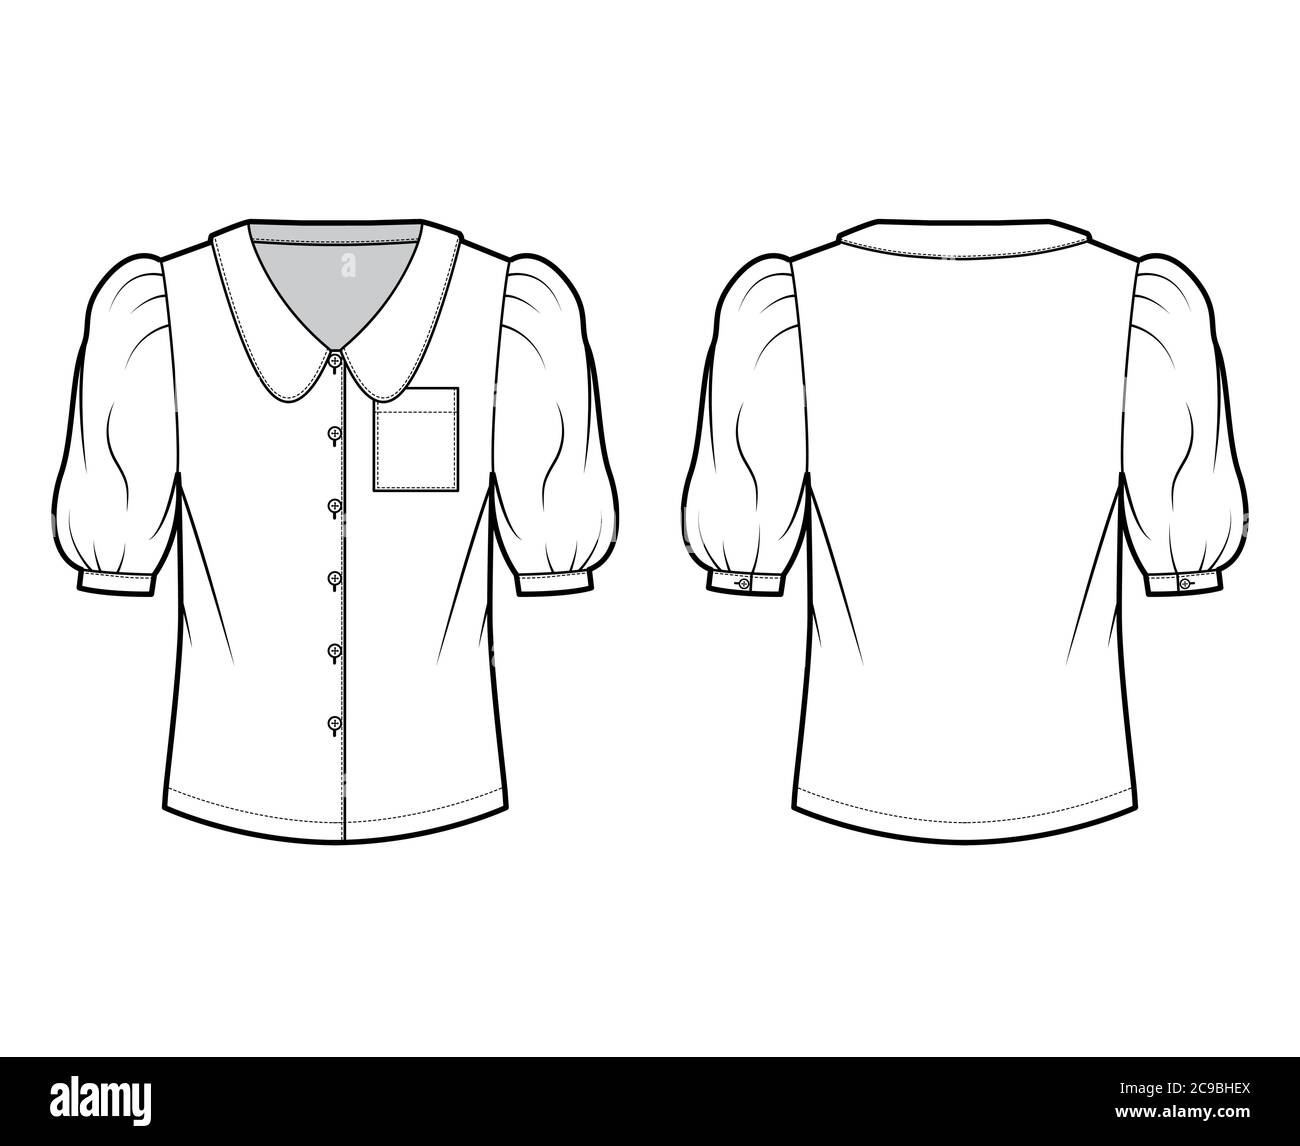 Scalloped collar shirt technical fashion illustration with elbow puff sleeve, front button-fastening, loose silhouette. Flat blouse apparel template front back, white color. Women, men unisex top CAD Stock Vector